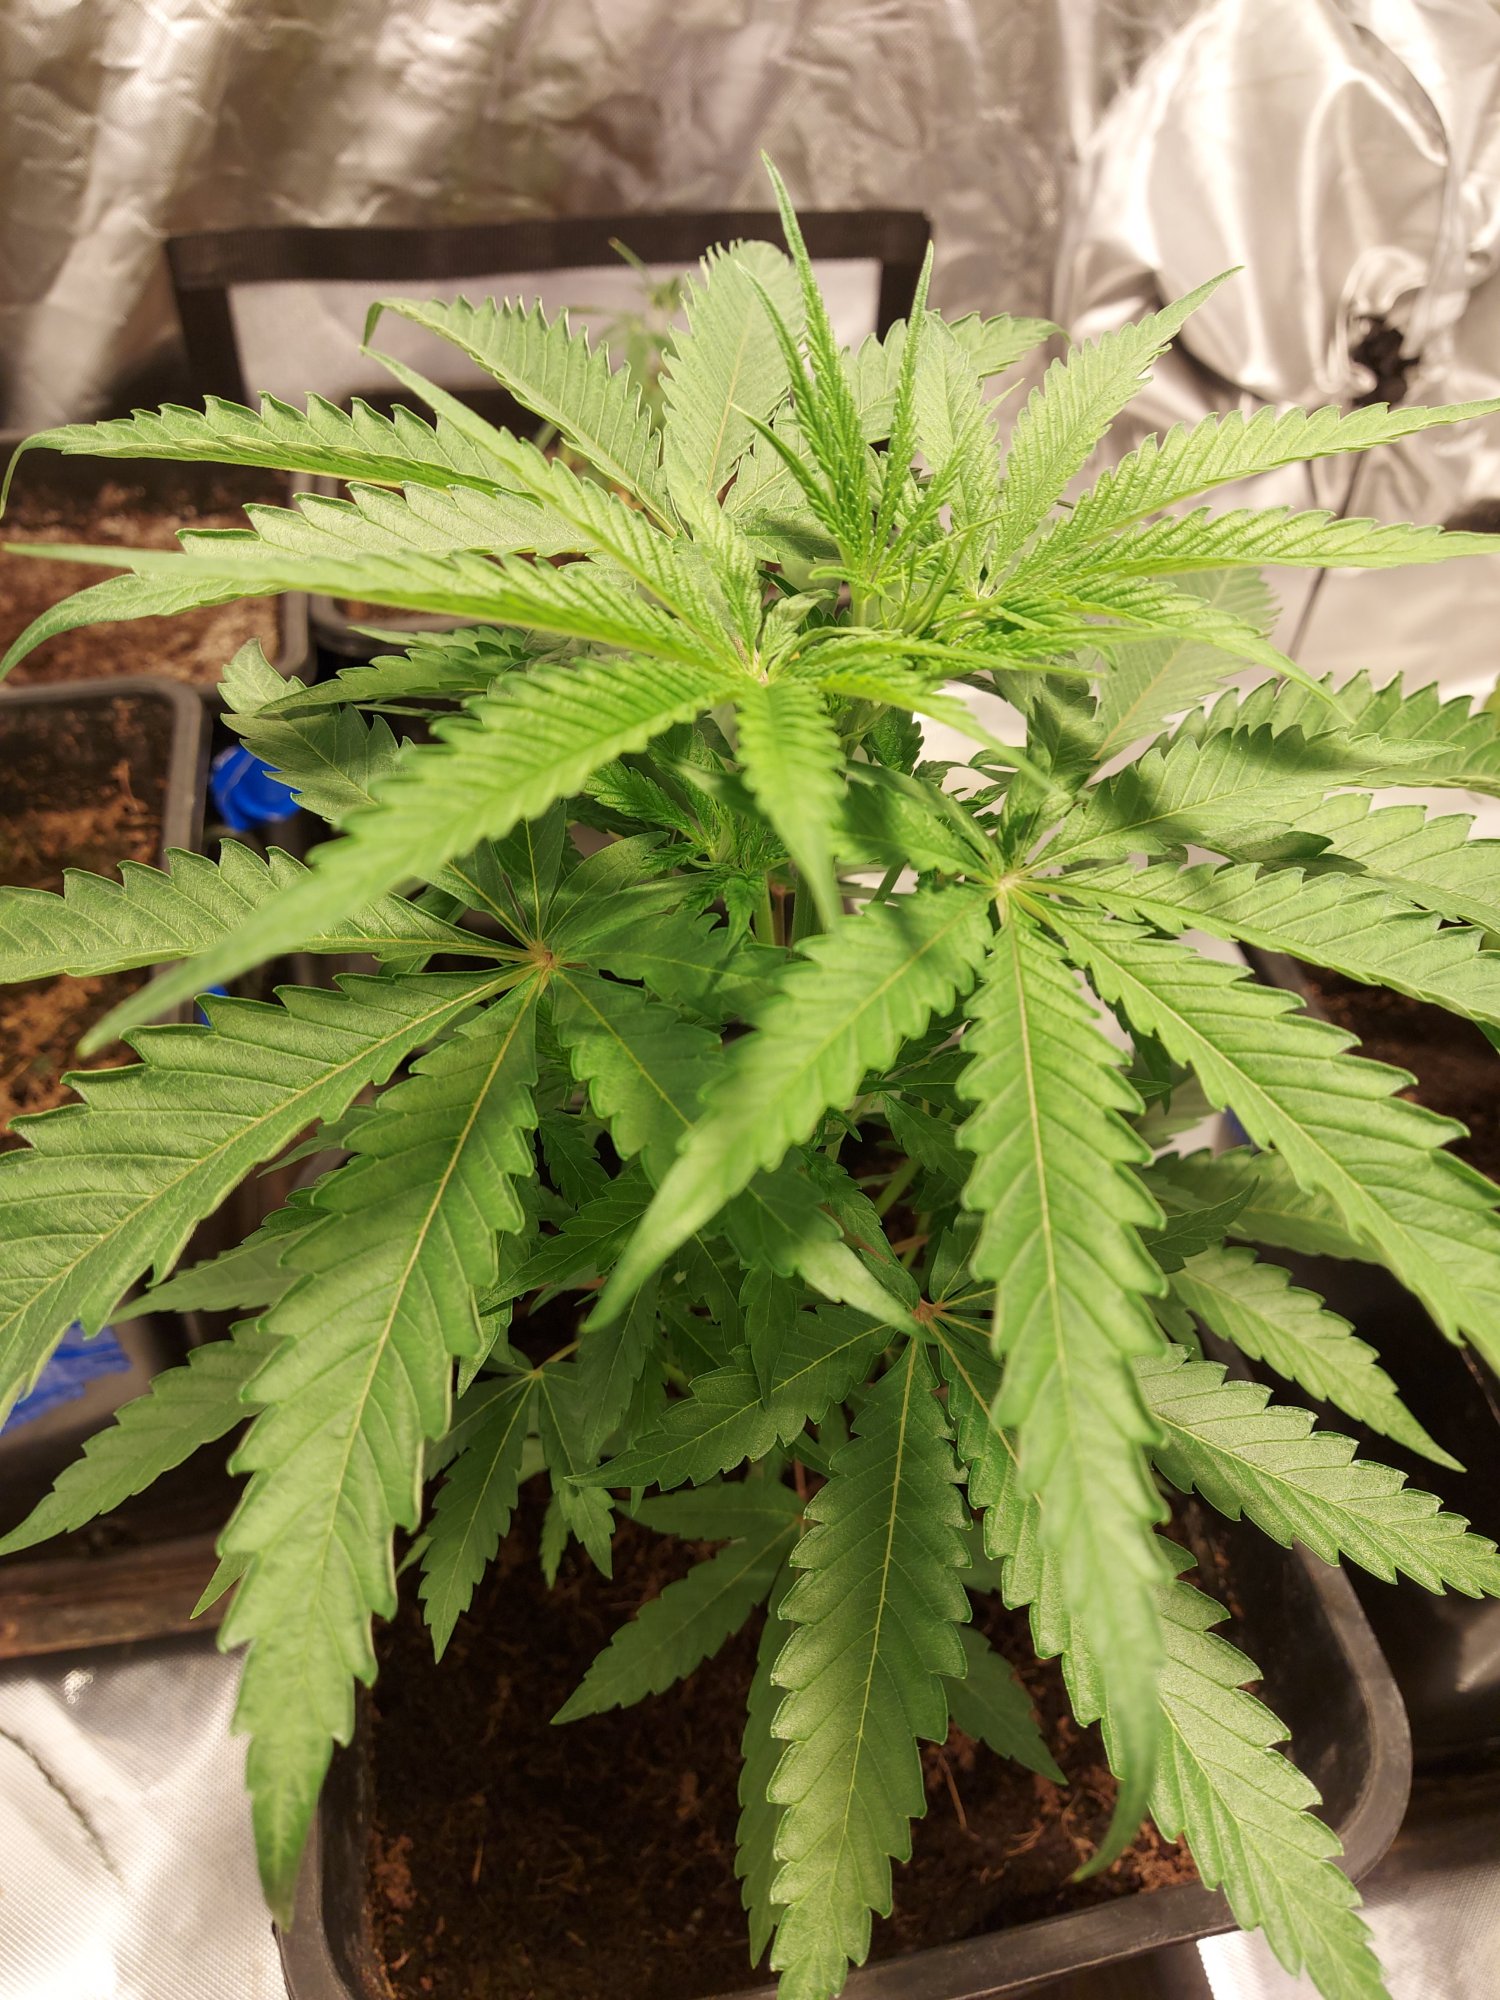 First timer looking for advice 3